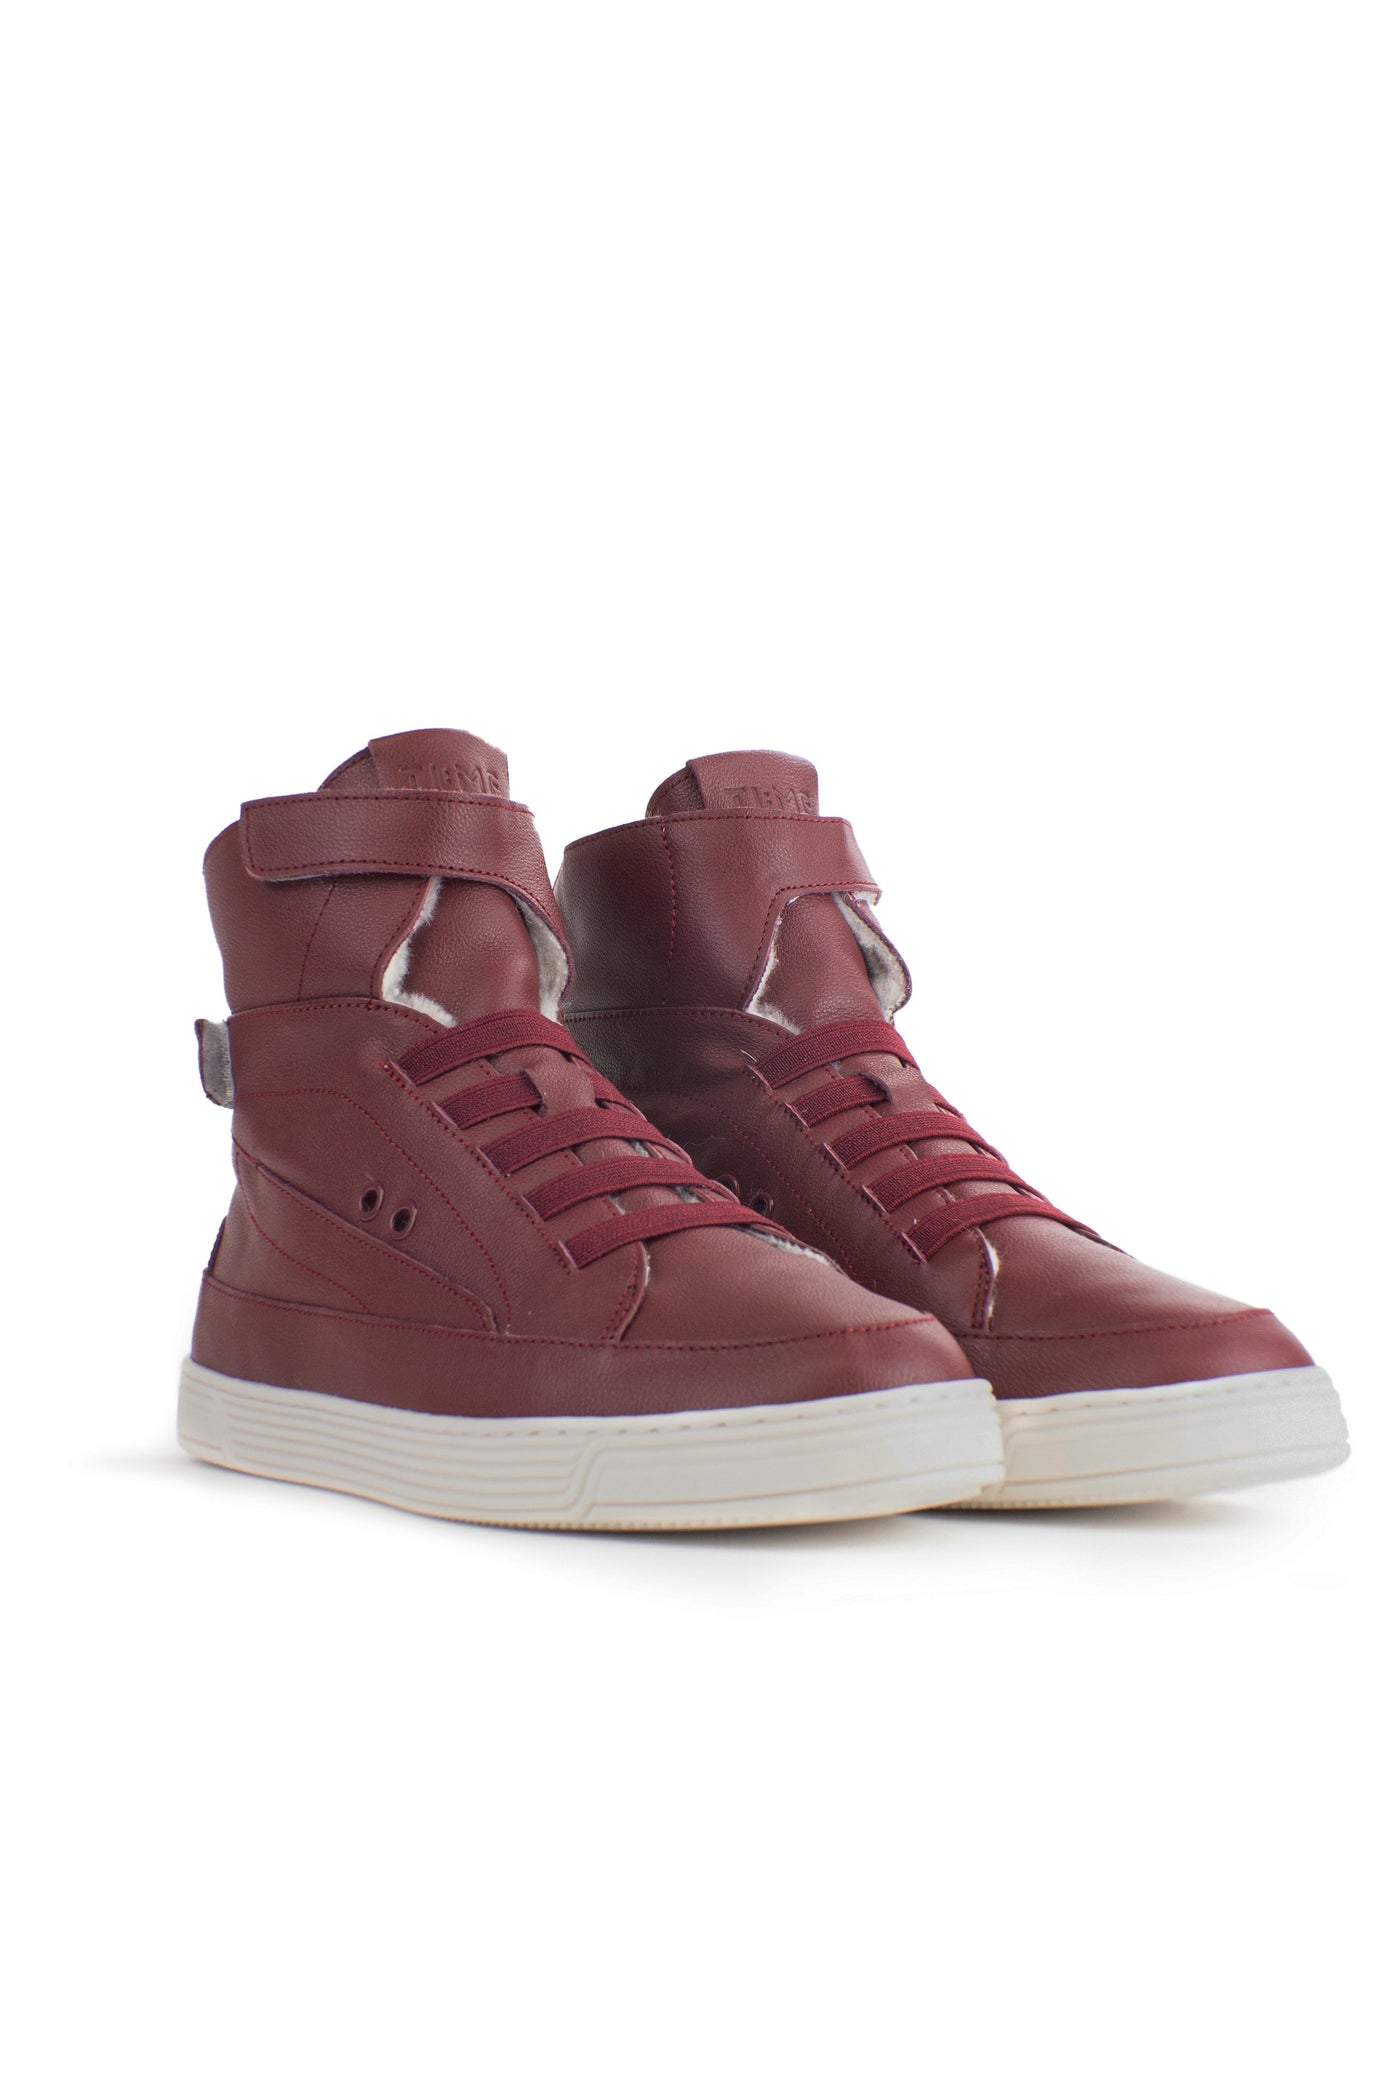 TIME Slippers-Men's Hi-top Slippers, #color_leather-burgundy